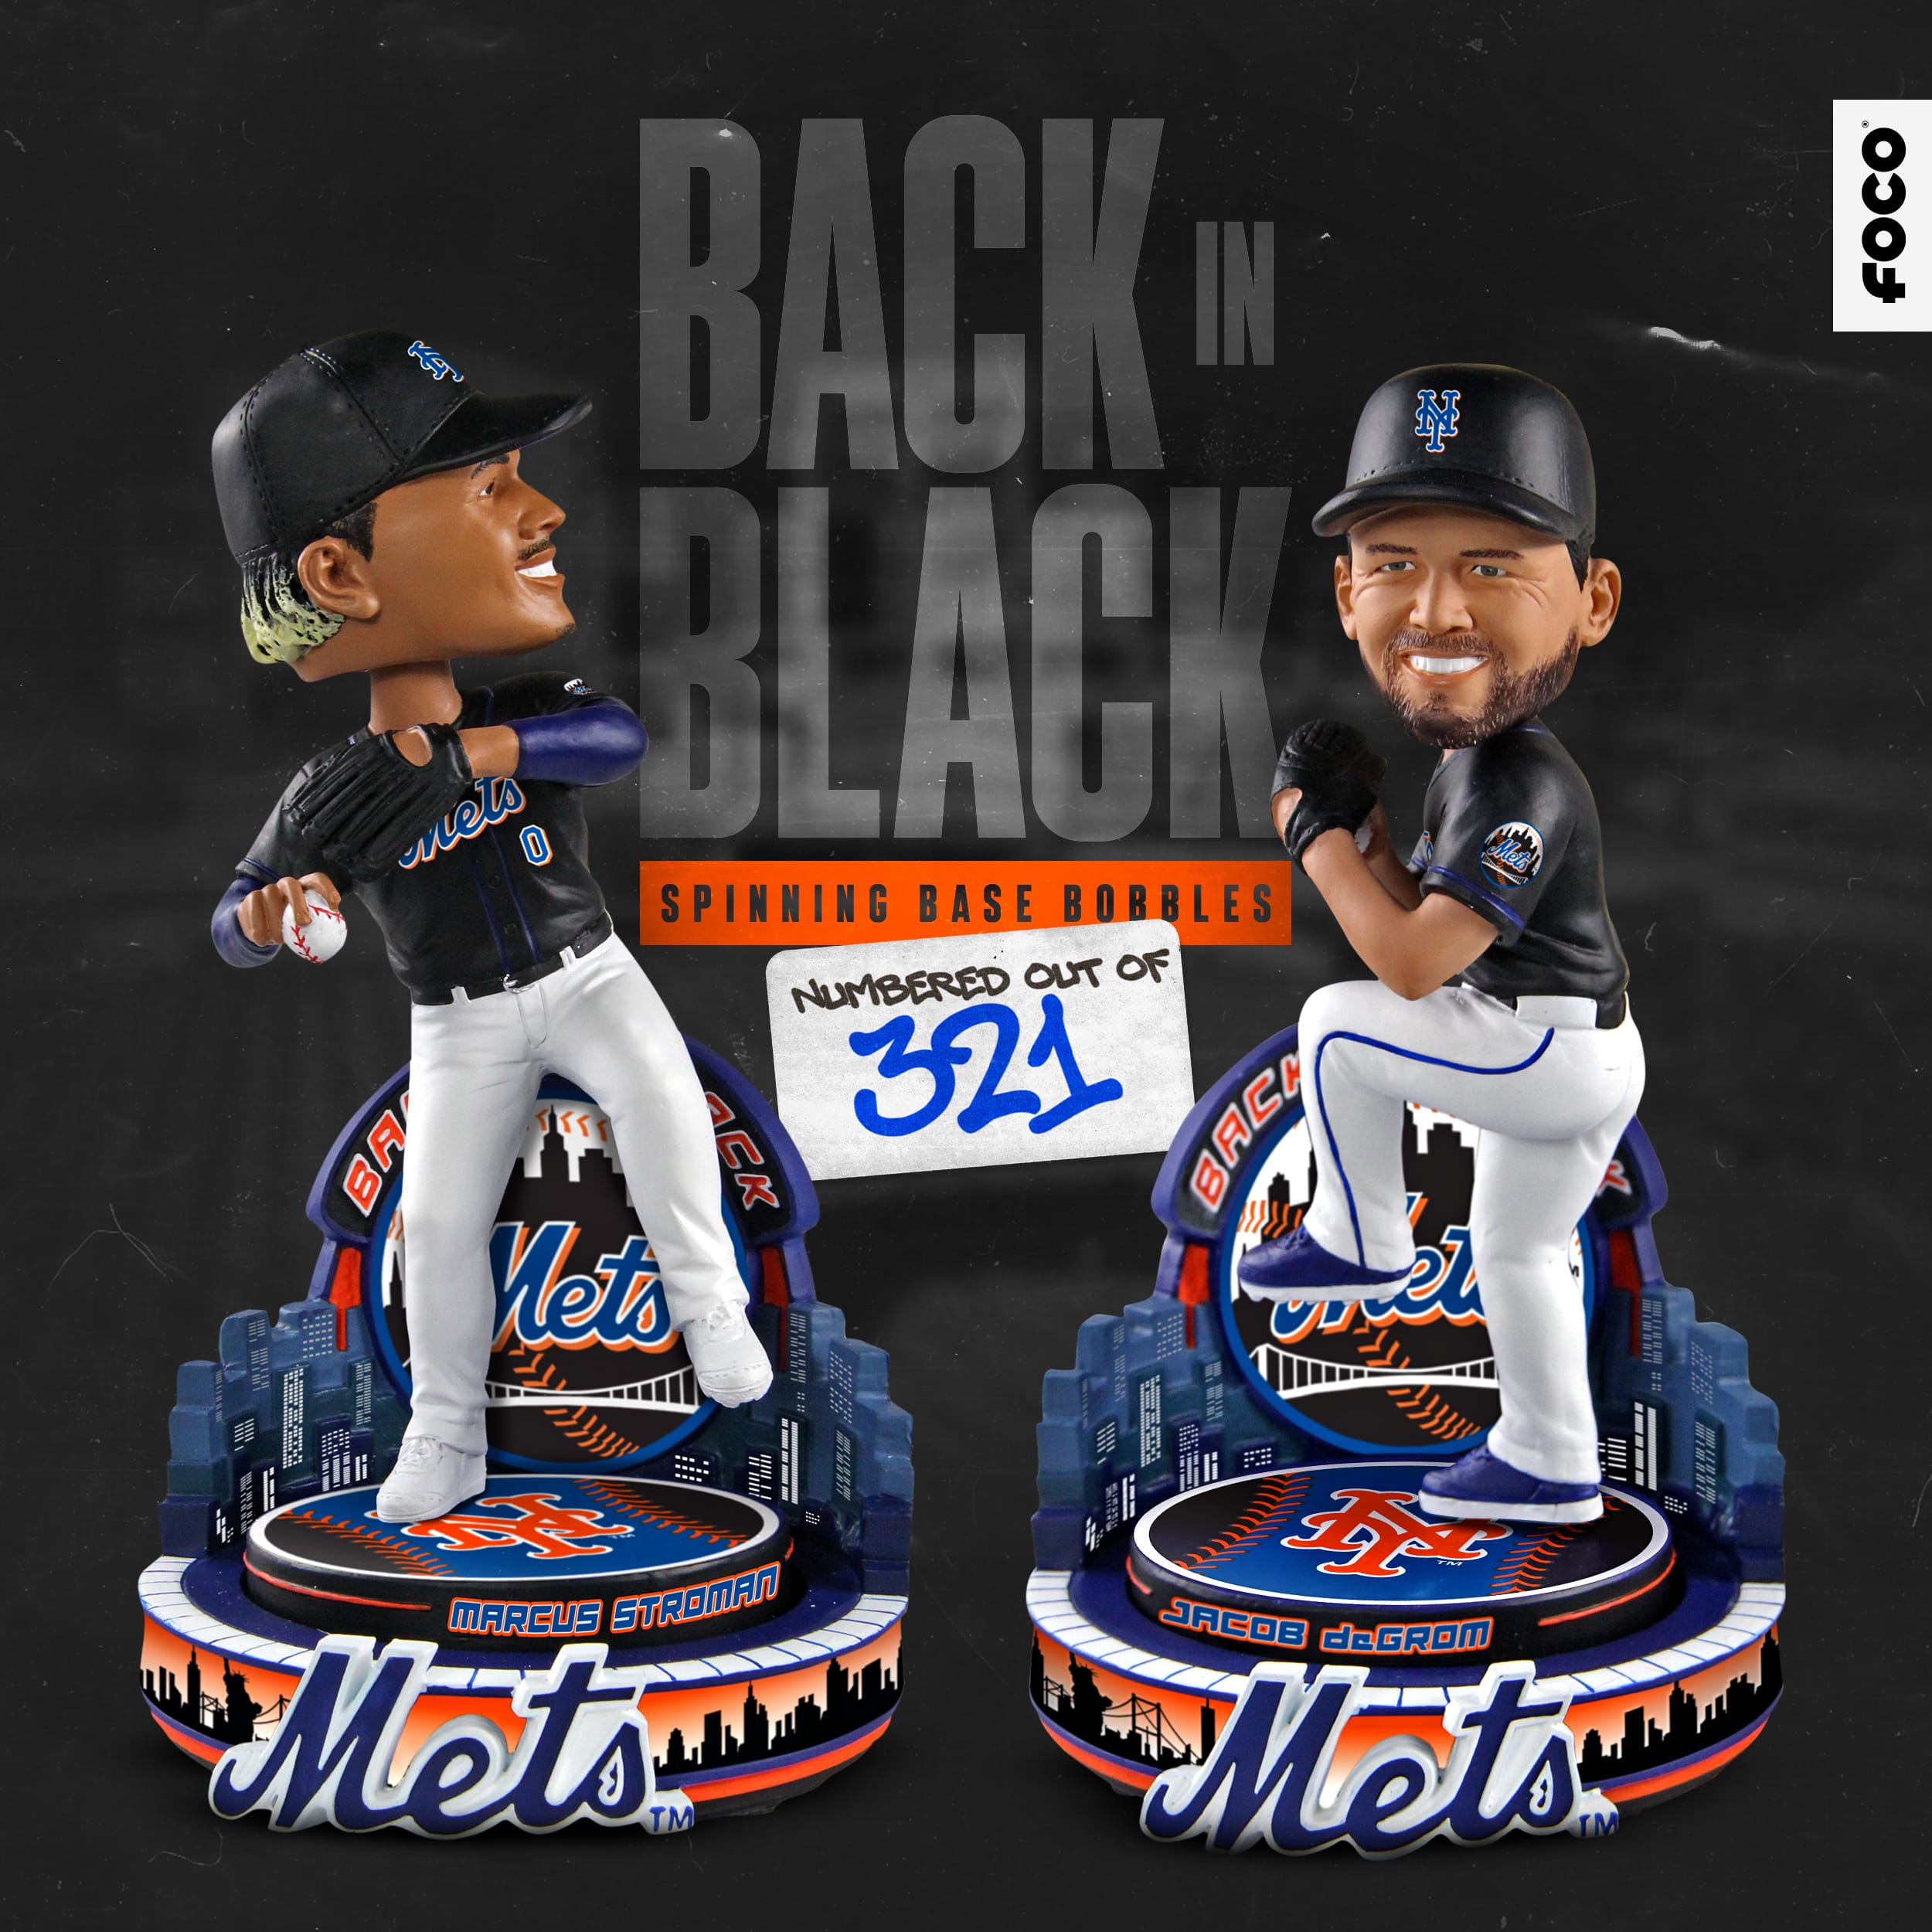 FOCO Releases 2021 Mets Black Jersey Bobbleheads